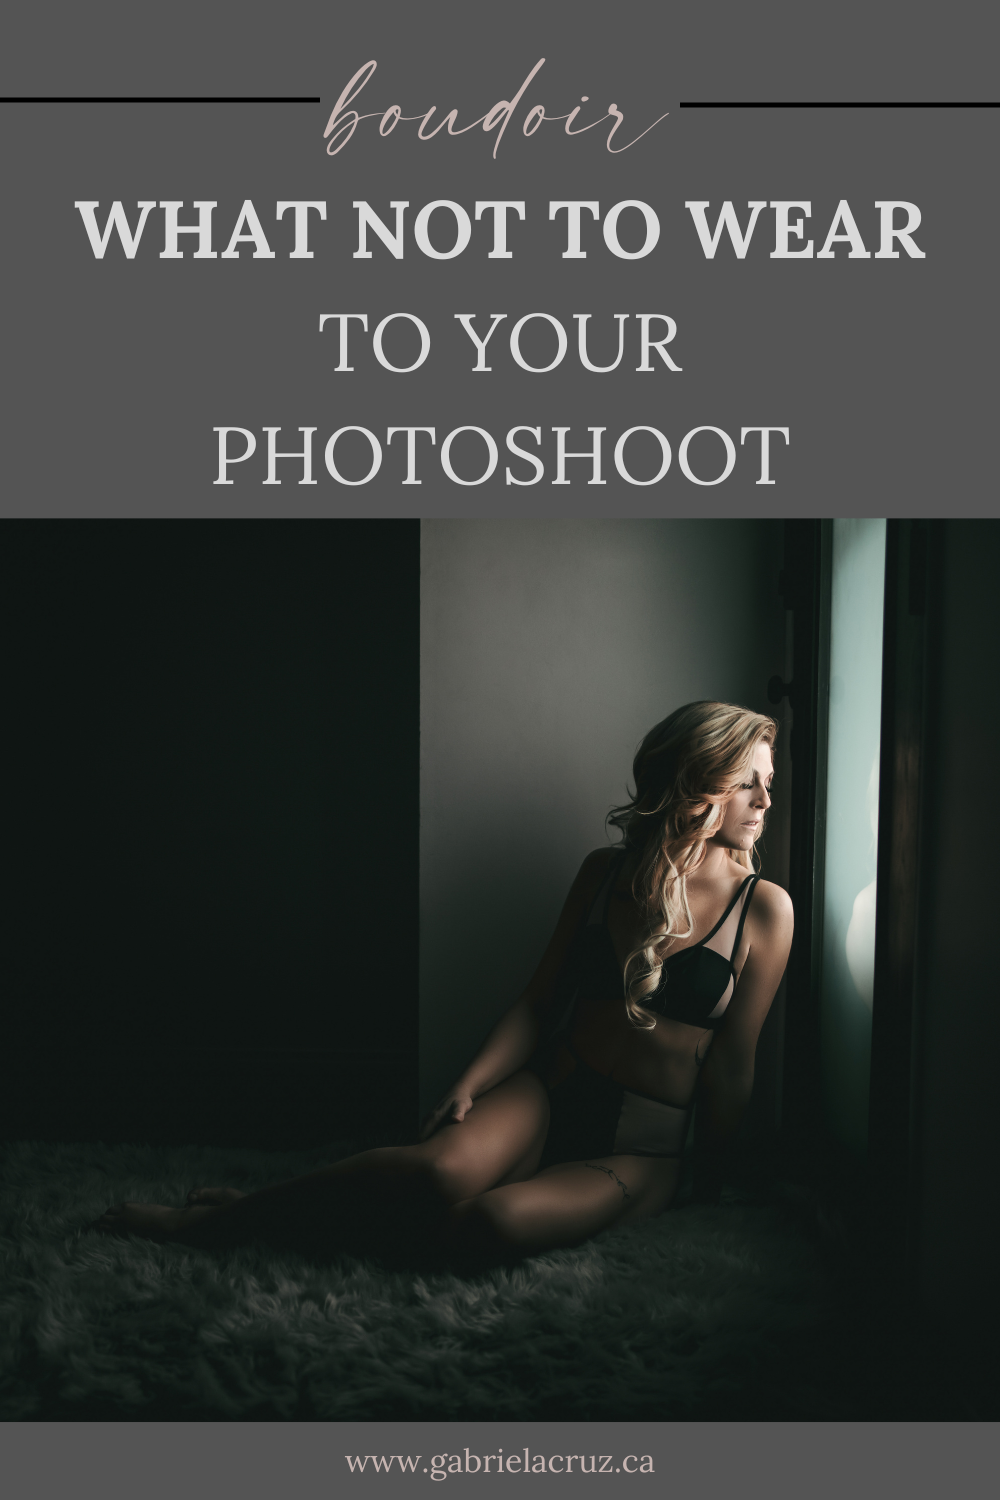 Not sure what to wear for your boudoir photos? Here's what NOT to wear and what we suggest for your next shoot at Gabriela Cruz Photography.